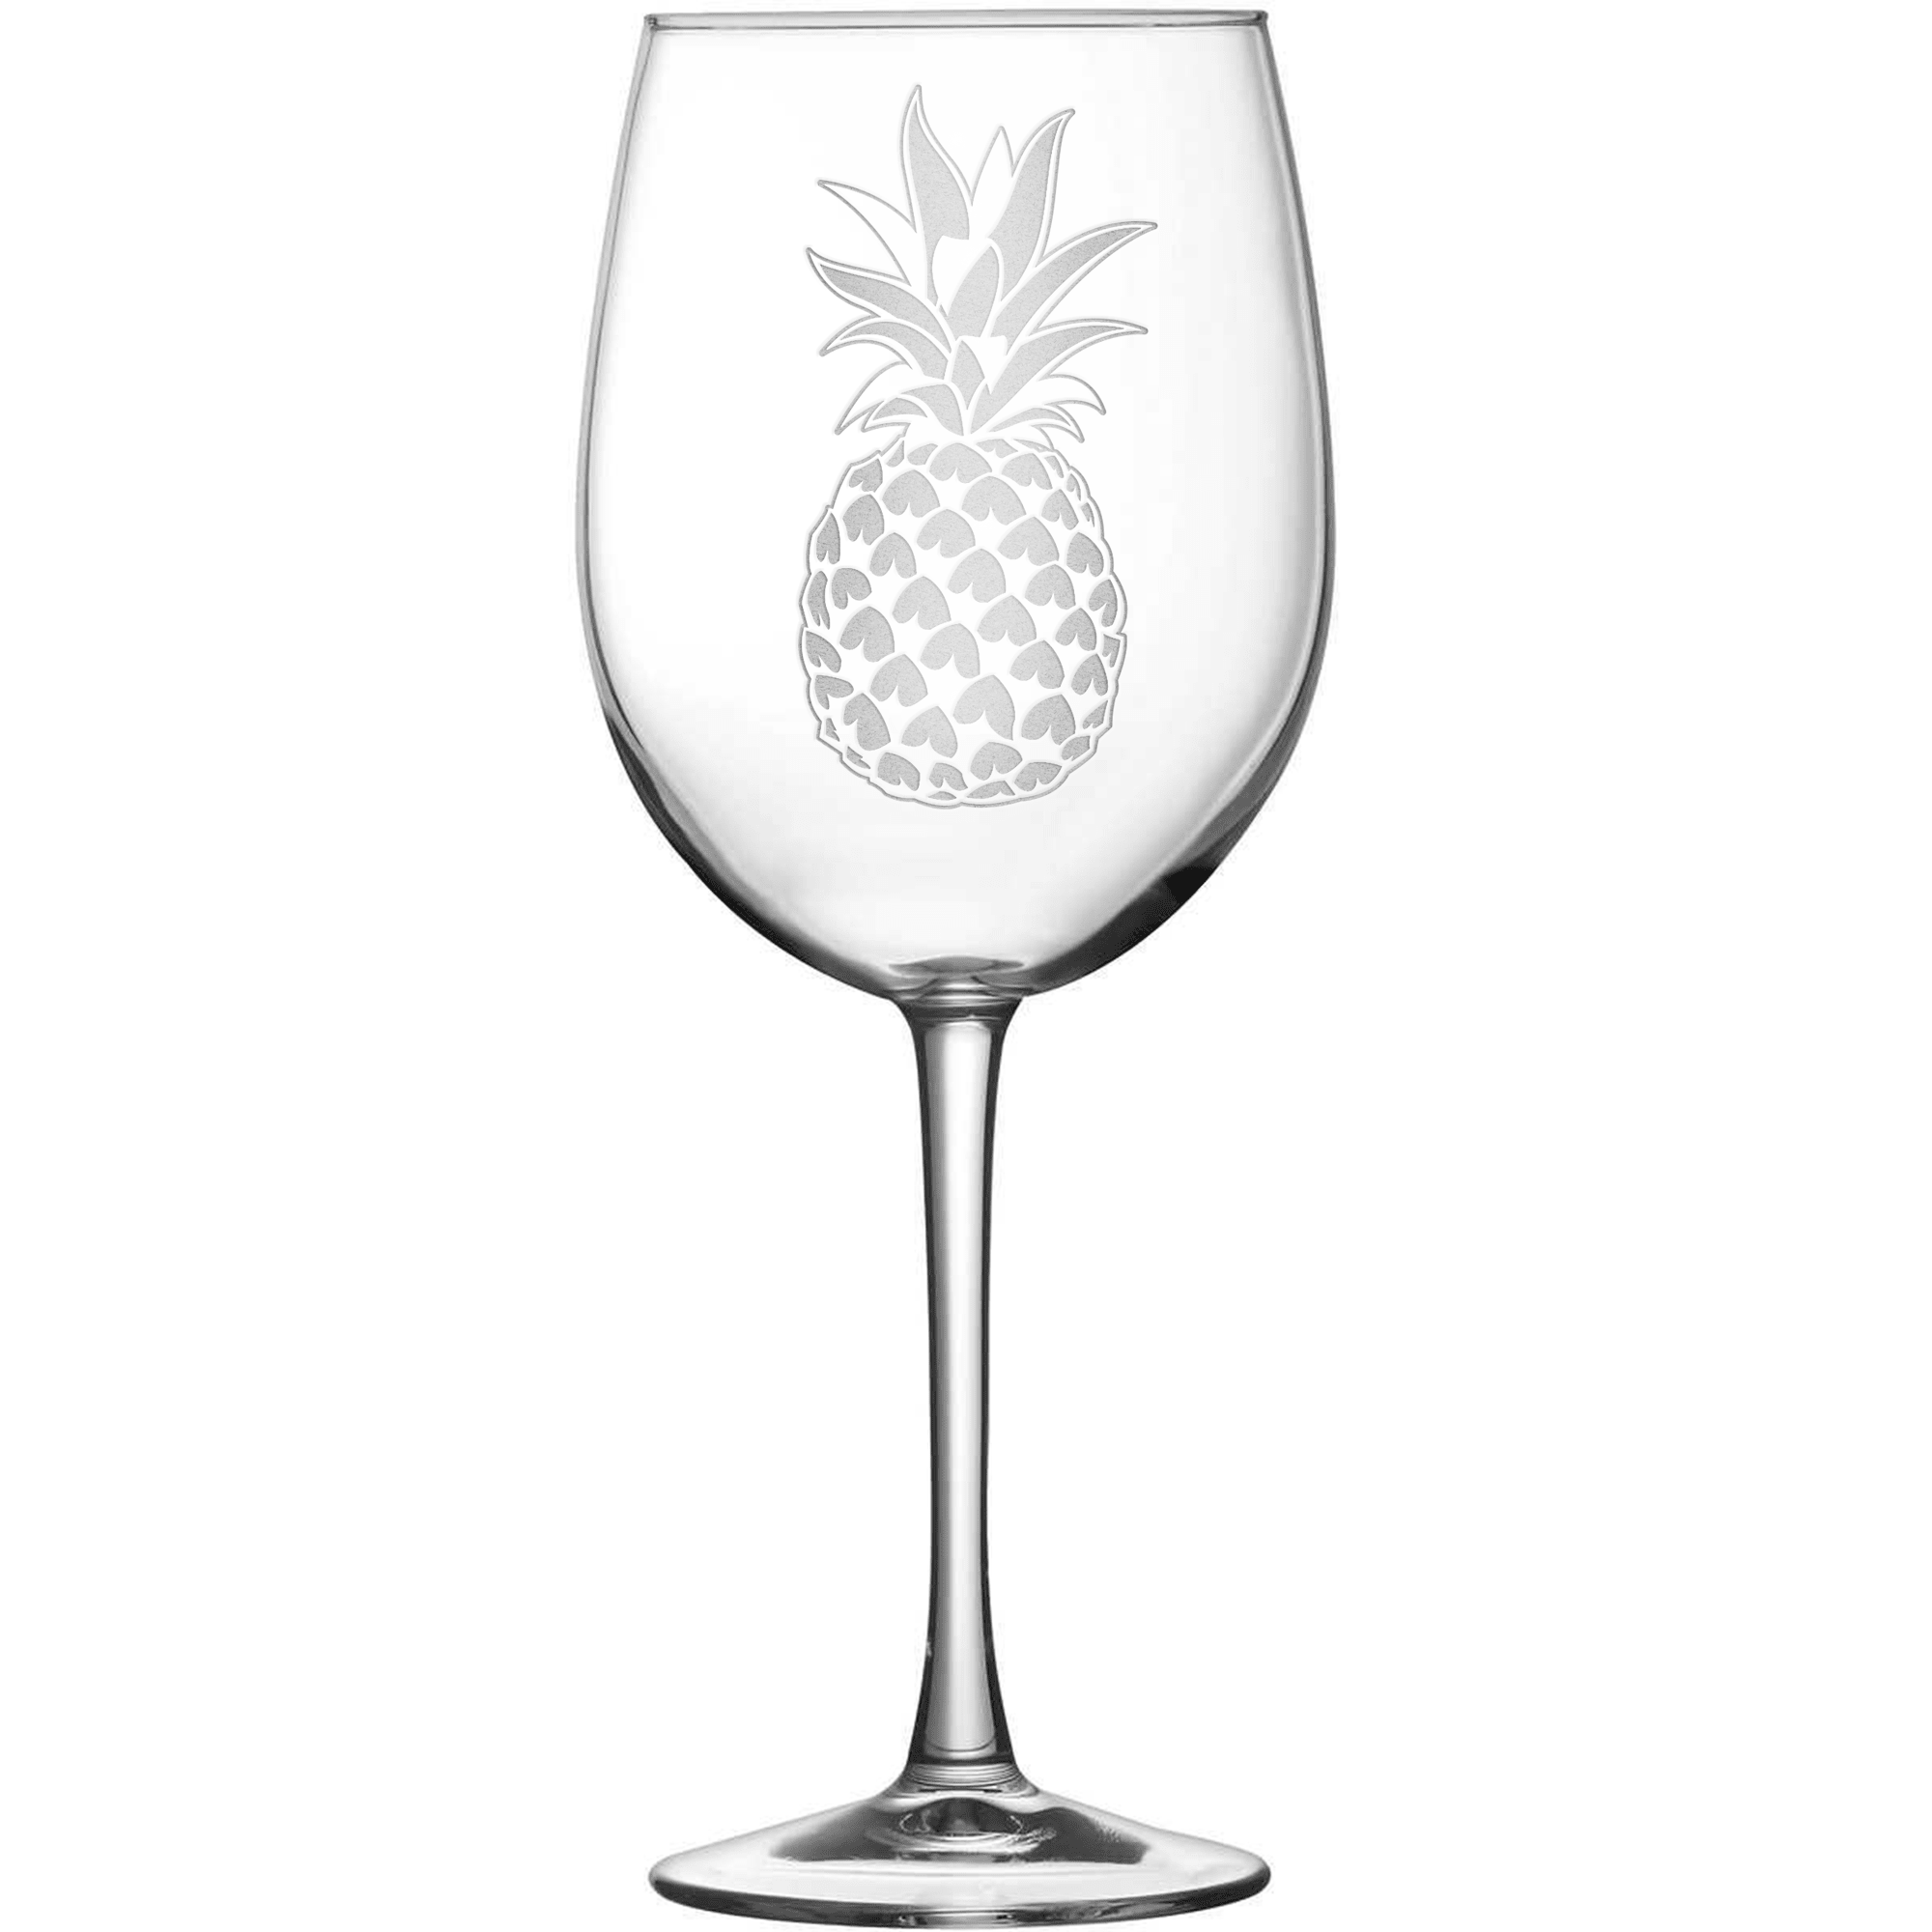 Tulip Wine Glass with Pineapple Design, Hand Etched by Integrity Bottles